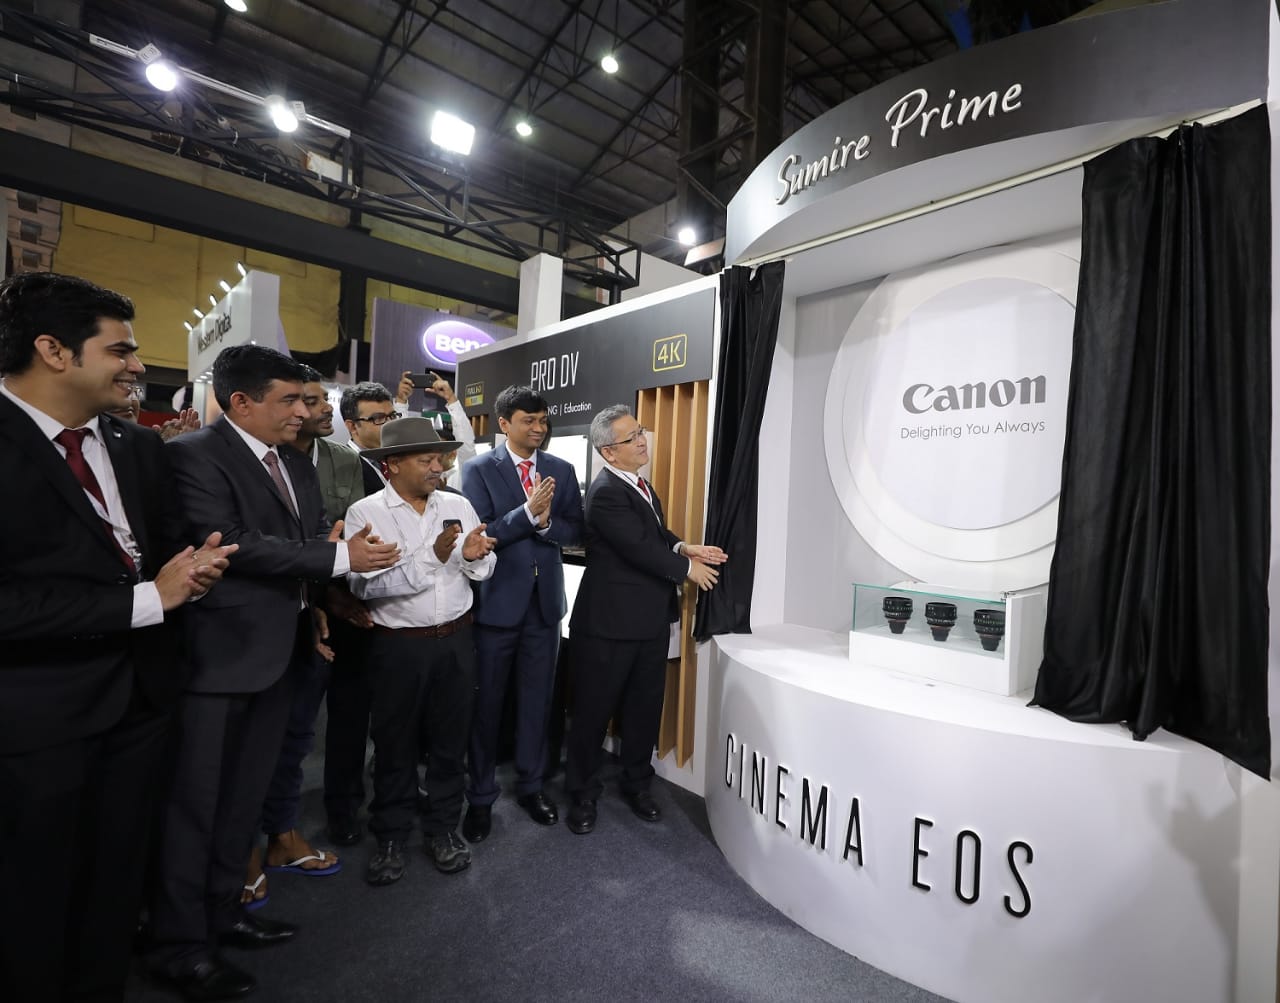 Mr. Kazutada Kobayashi, President & CEO, Canon India and Mr. C Sukumaran, Director, Image Communication Products and Consumer System Products along with the Canon India team launching the flagship Sumire Prime Lens at the Broadcast India Show 2019 -Photo By Sachin Murdeshwar GPN